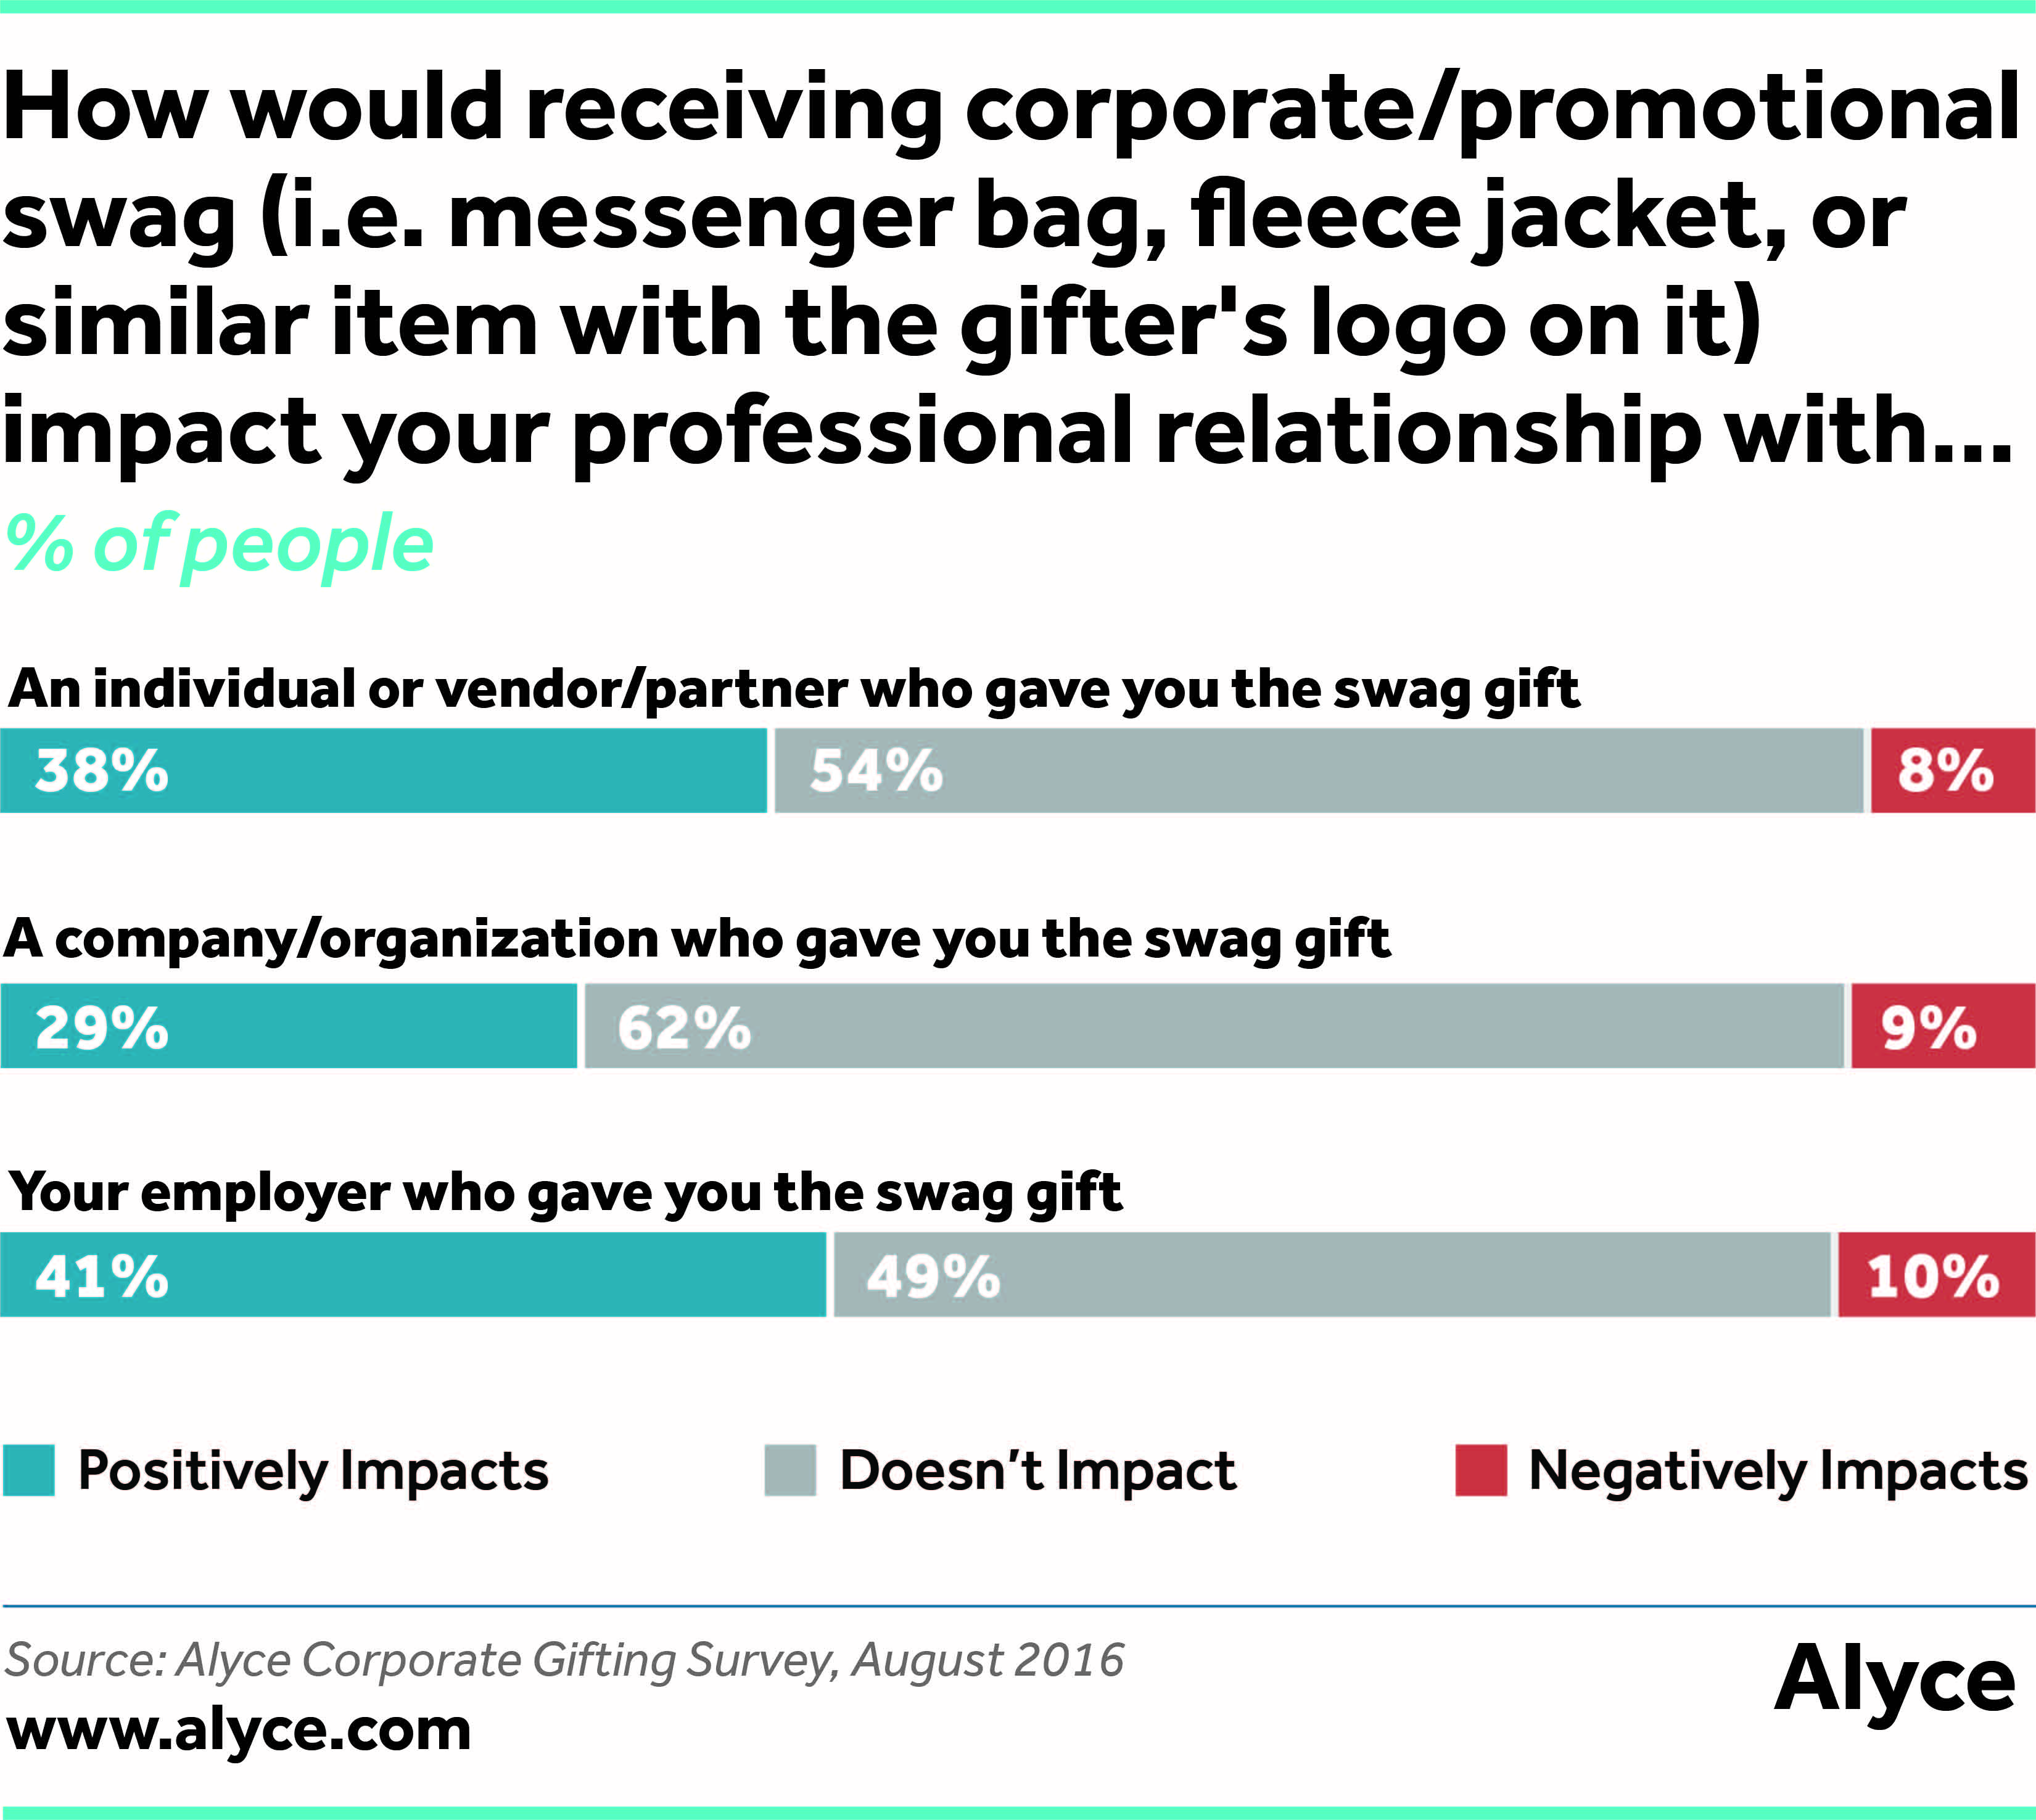 How would receiving corporate/promotional swag (i.e. messenger bag, fleece jacket, or similar item with the gifter's logo on it) impact your professional relationship with...